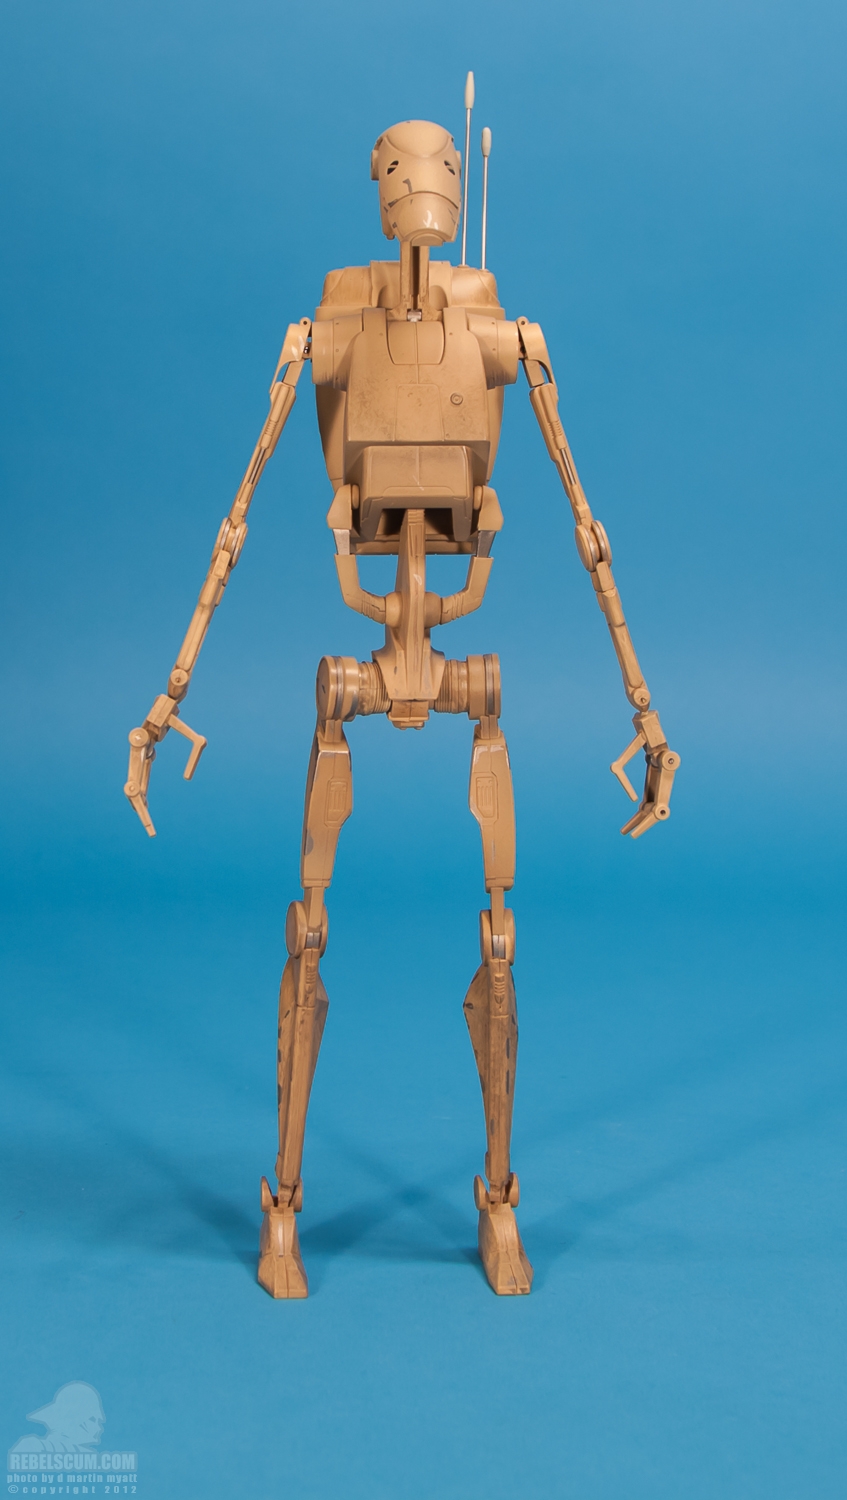 STAP_Battle_Droid_Star_Wars_Sideshow_Collectibles-09.jpg